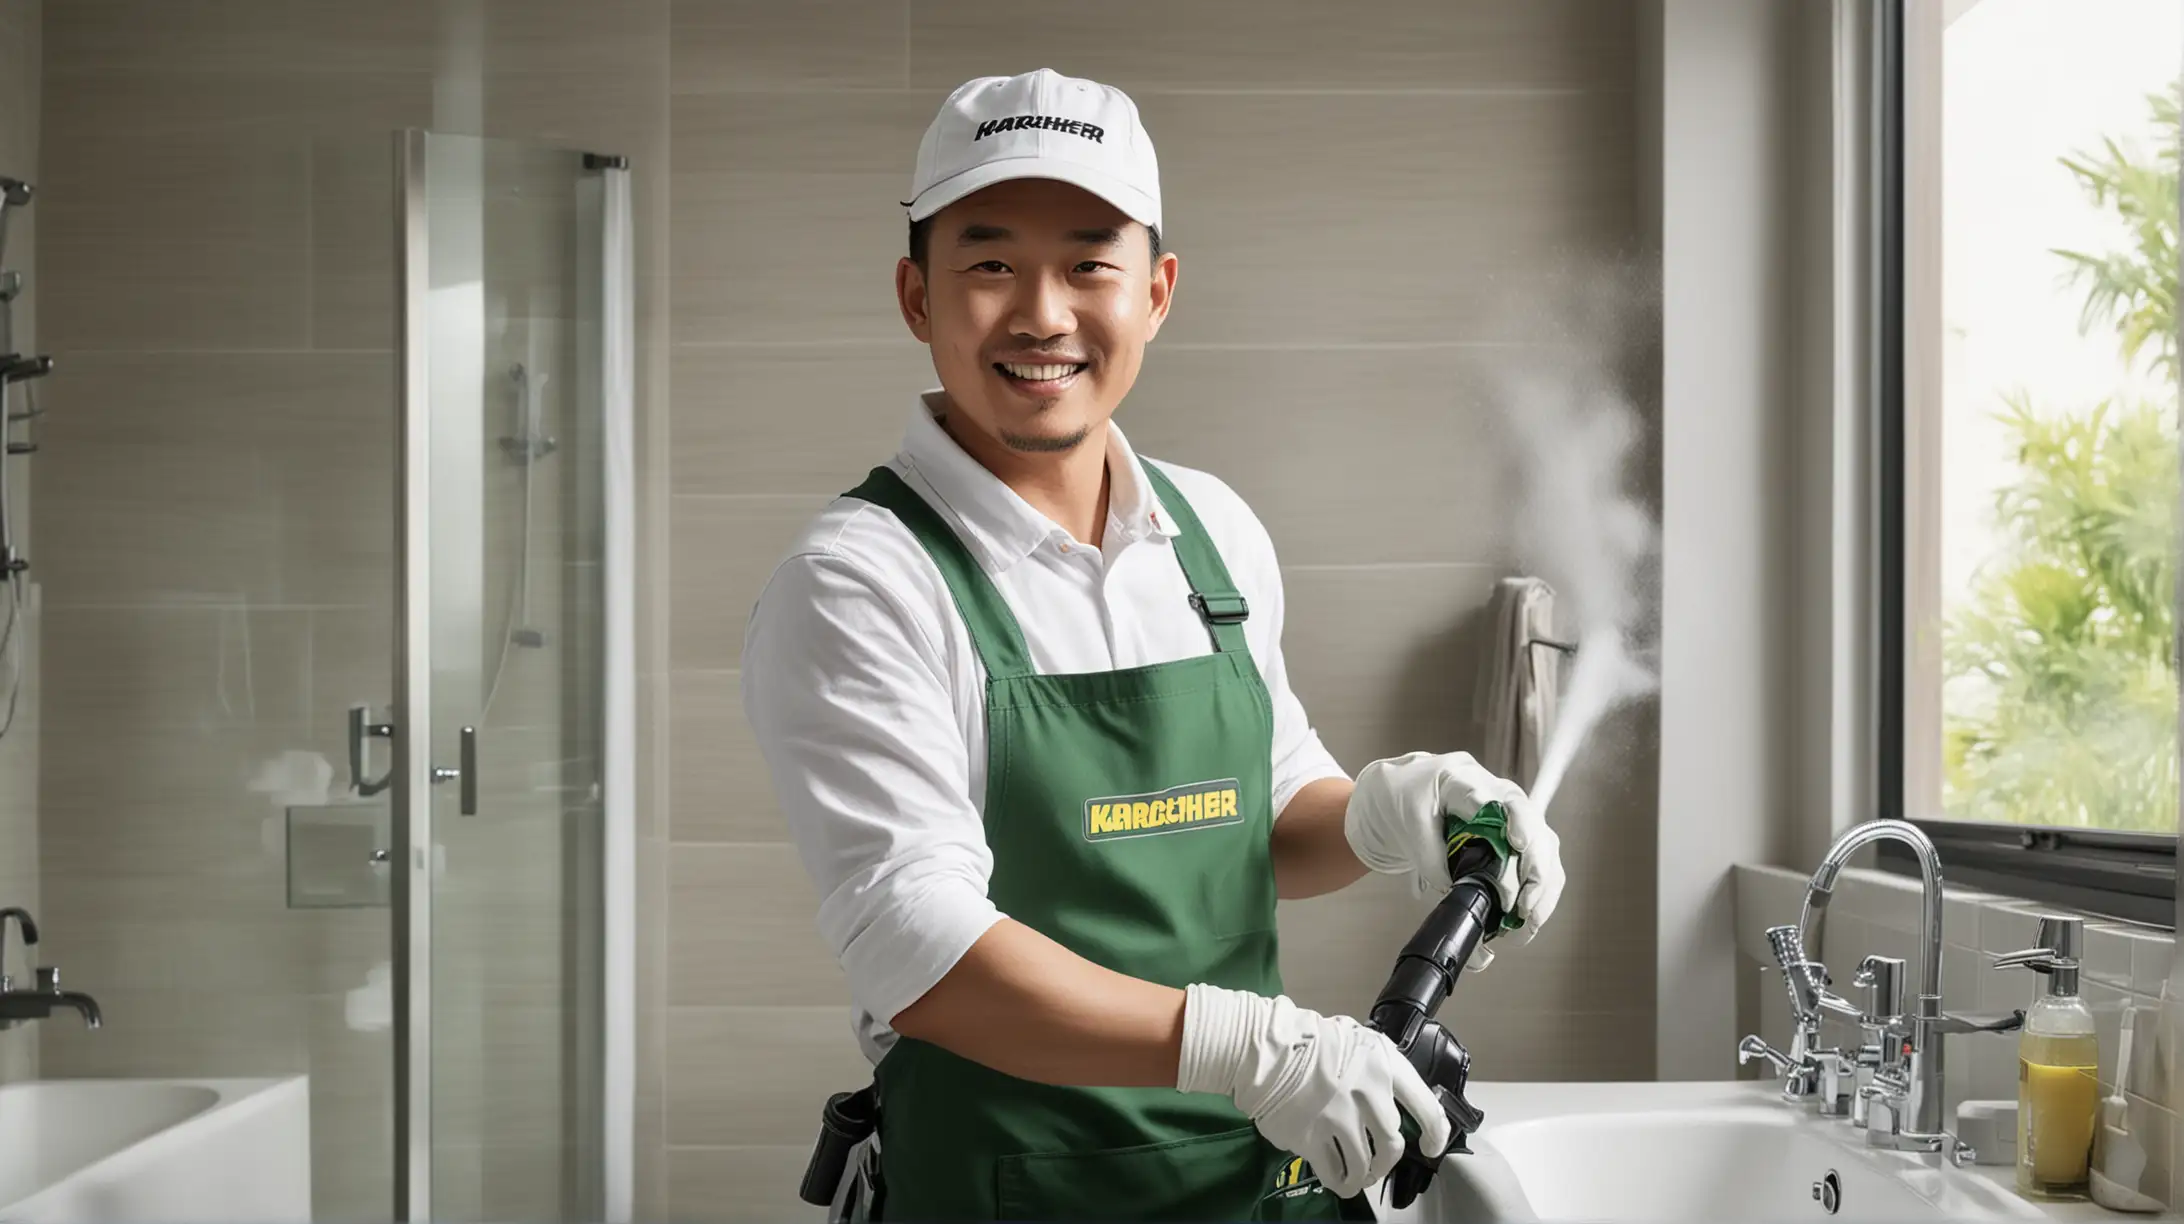 Chinese Butler Smiling with Karcher Steam Cleaner in Bathroom